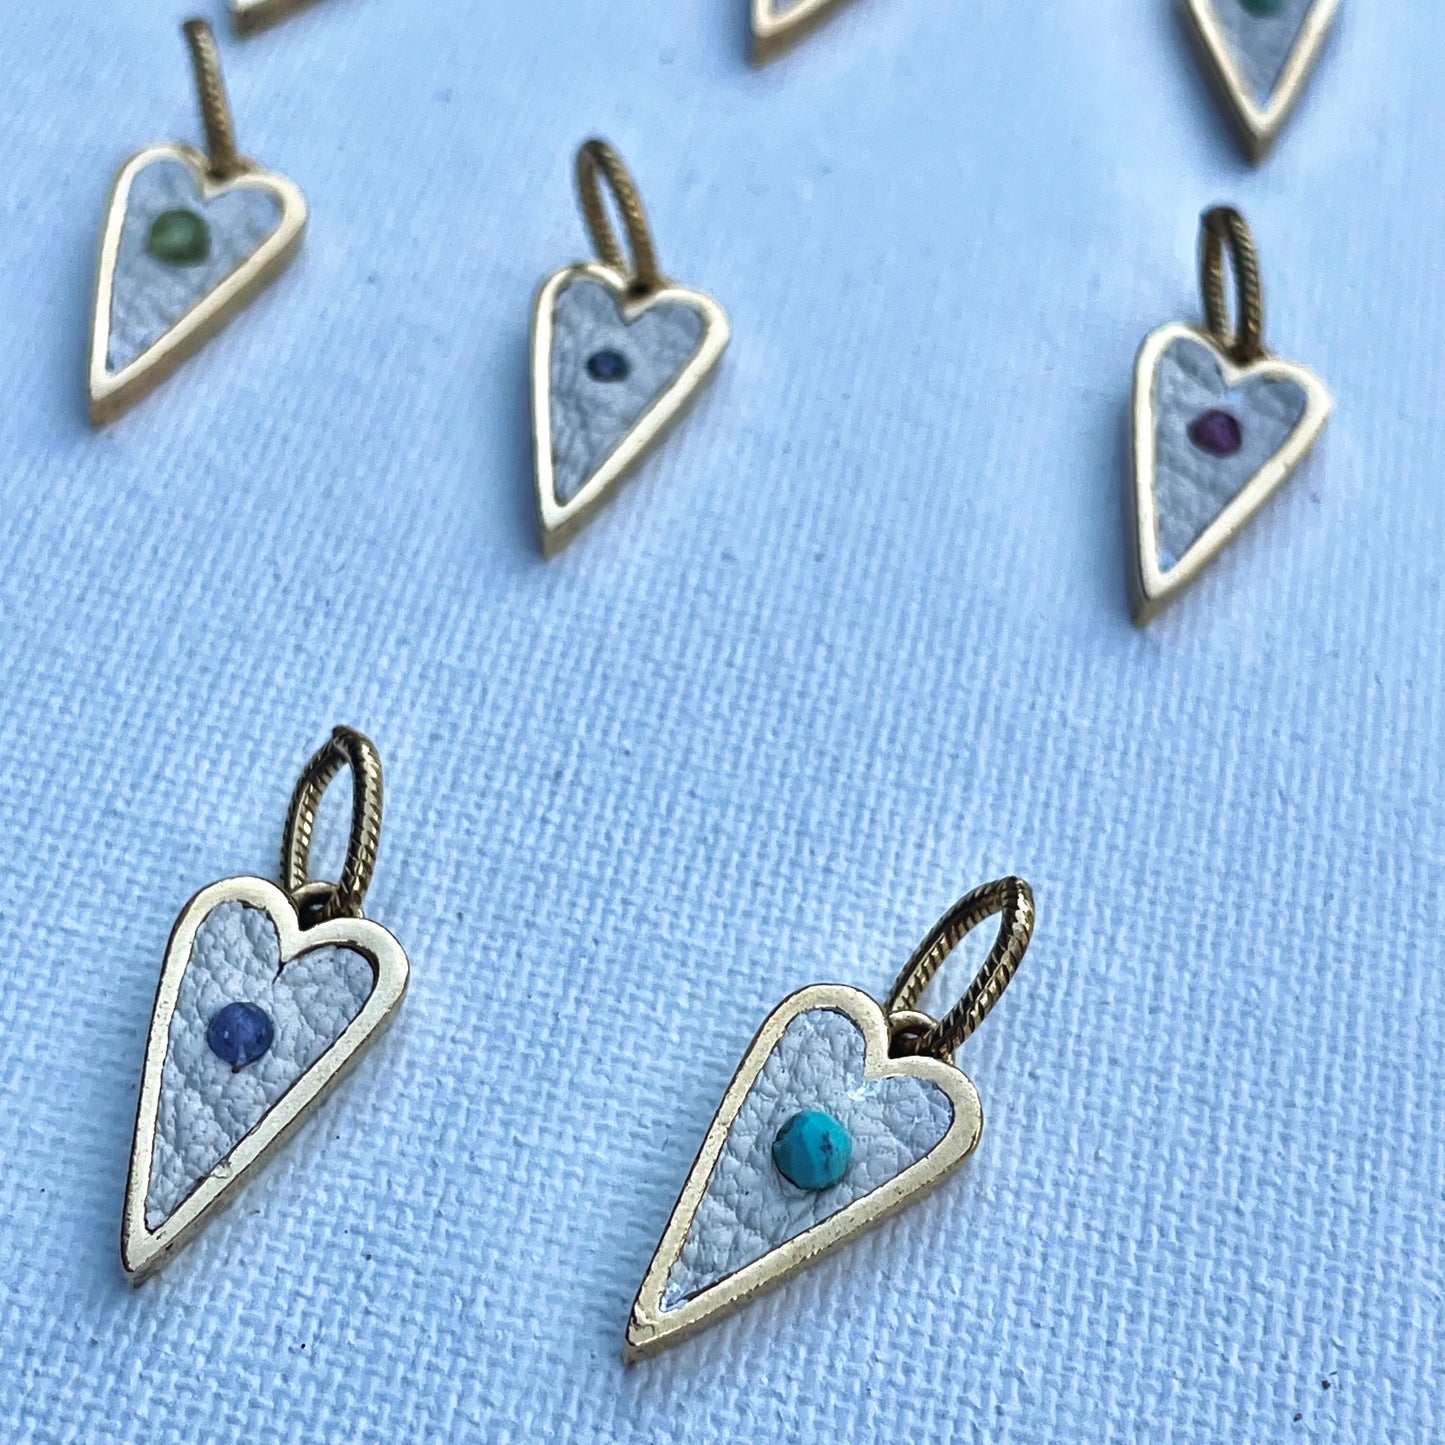 Gemstone Heart Charms - available with so many different natural gemstones, including all the birthstones!